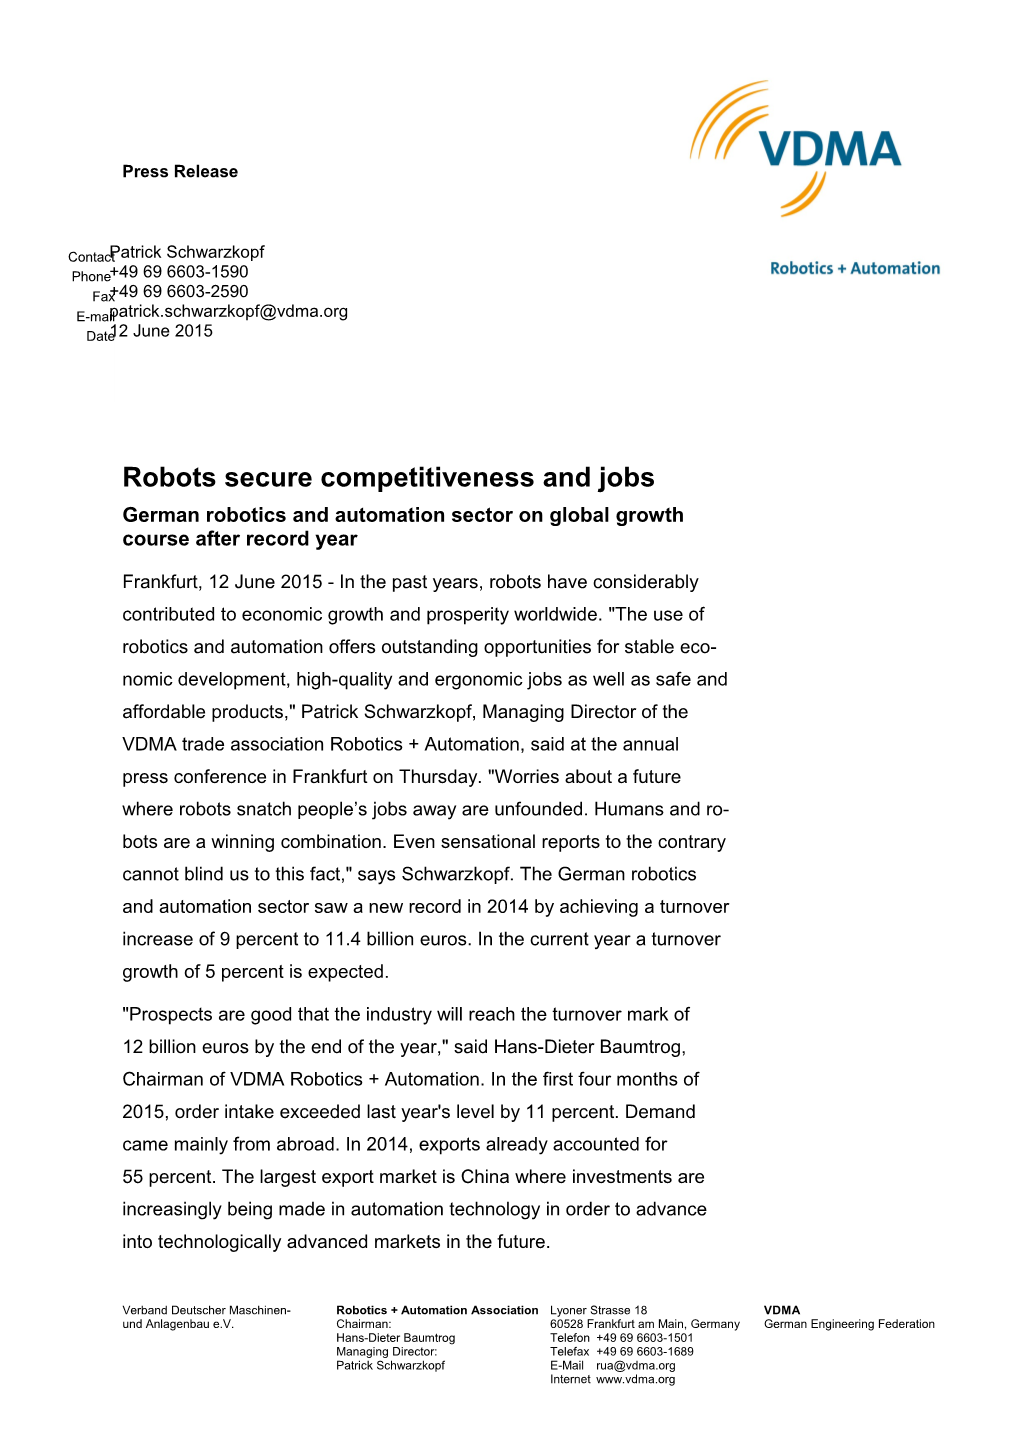 Robots Secure Competitiveness and Jobs